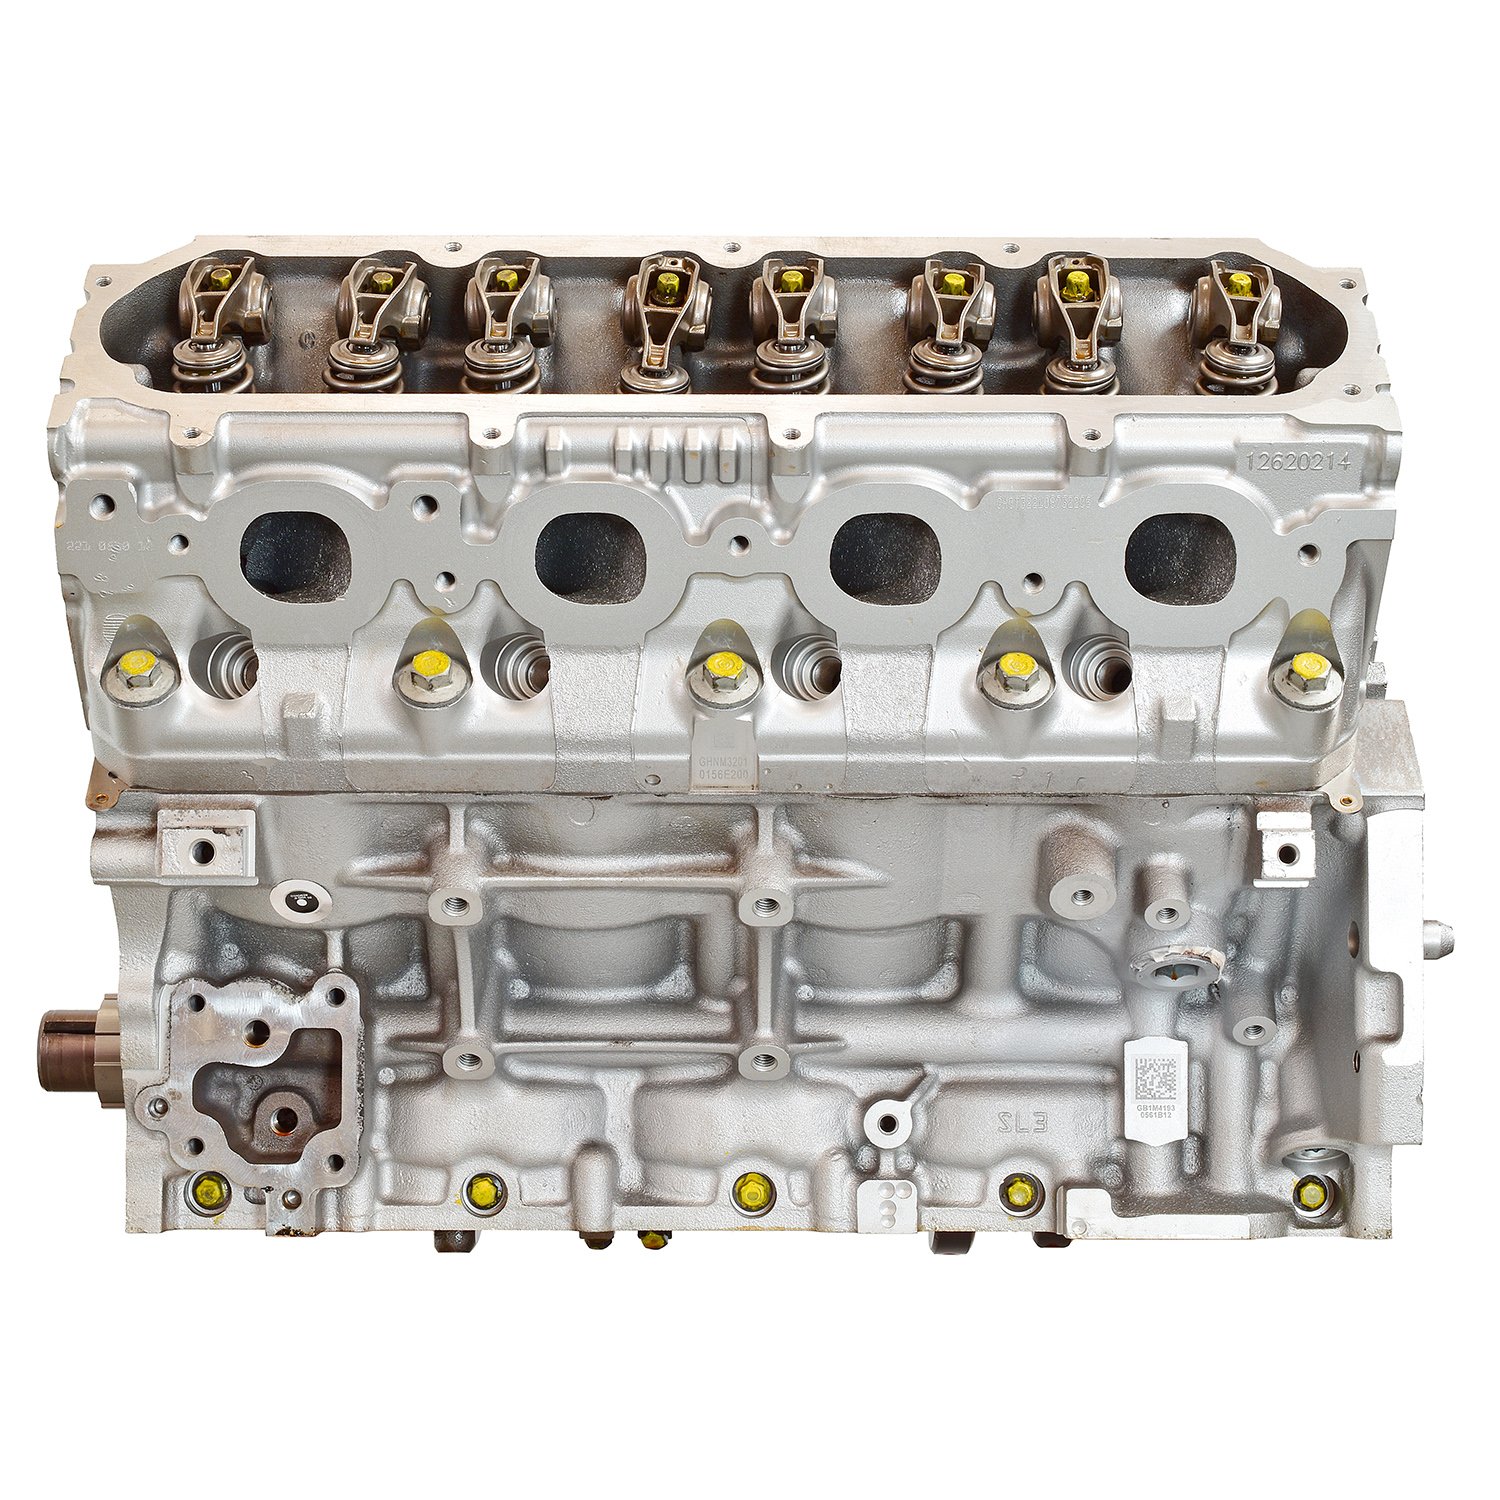 DCT21 Remanufactured Crate Engine for 2014-2020 Chevrolet, GMC Models with 5.3L GDI